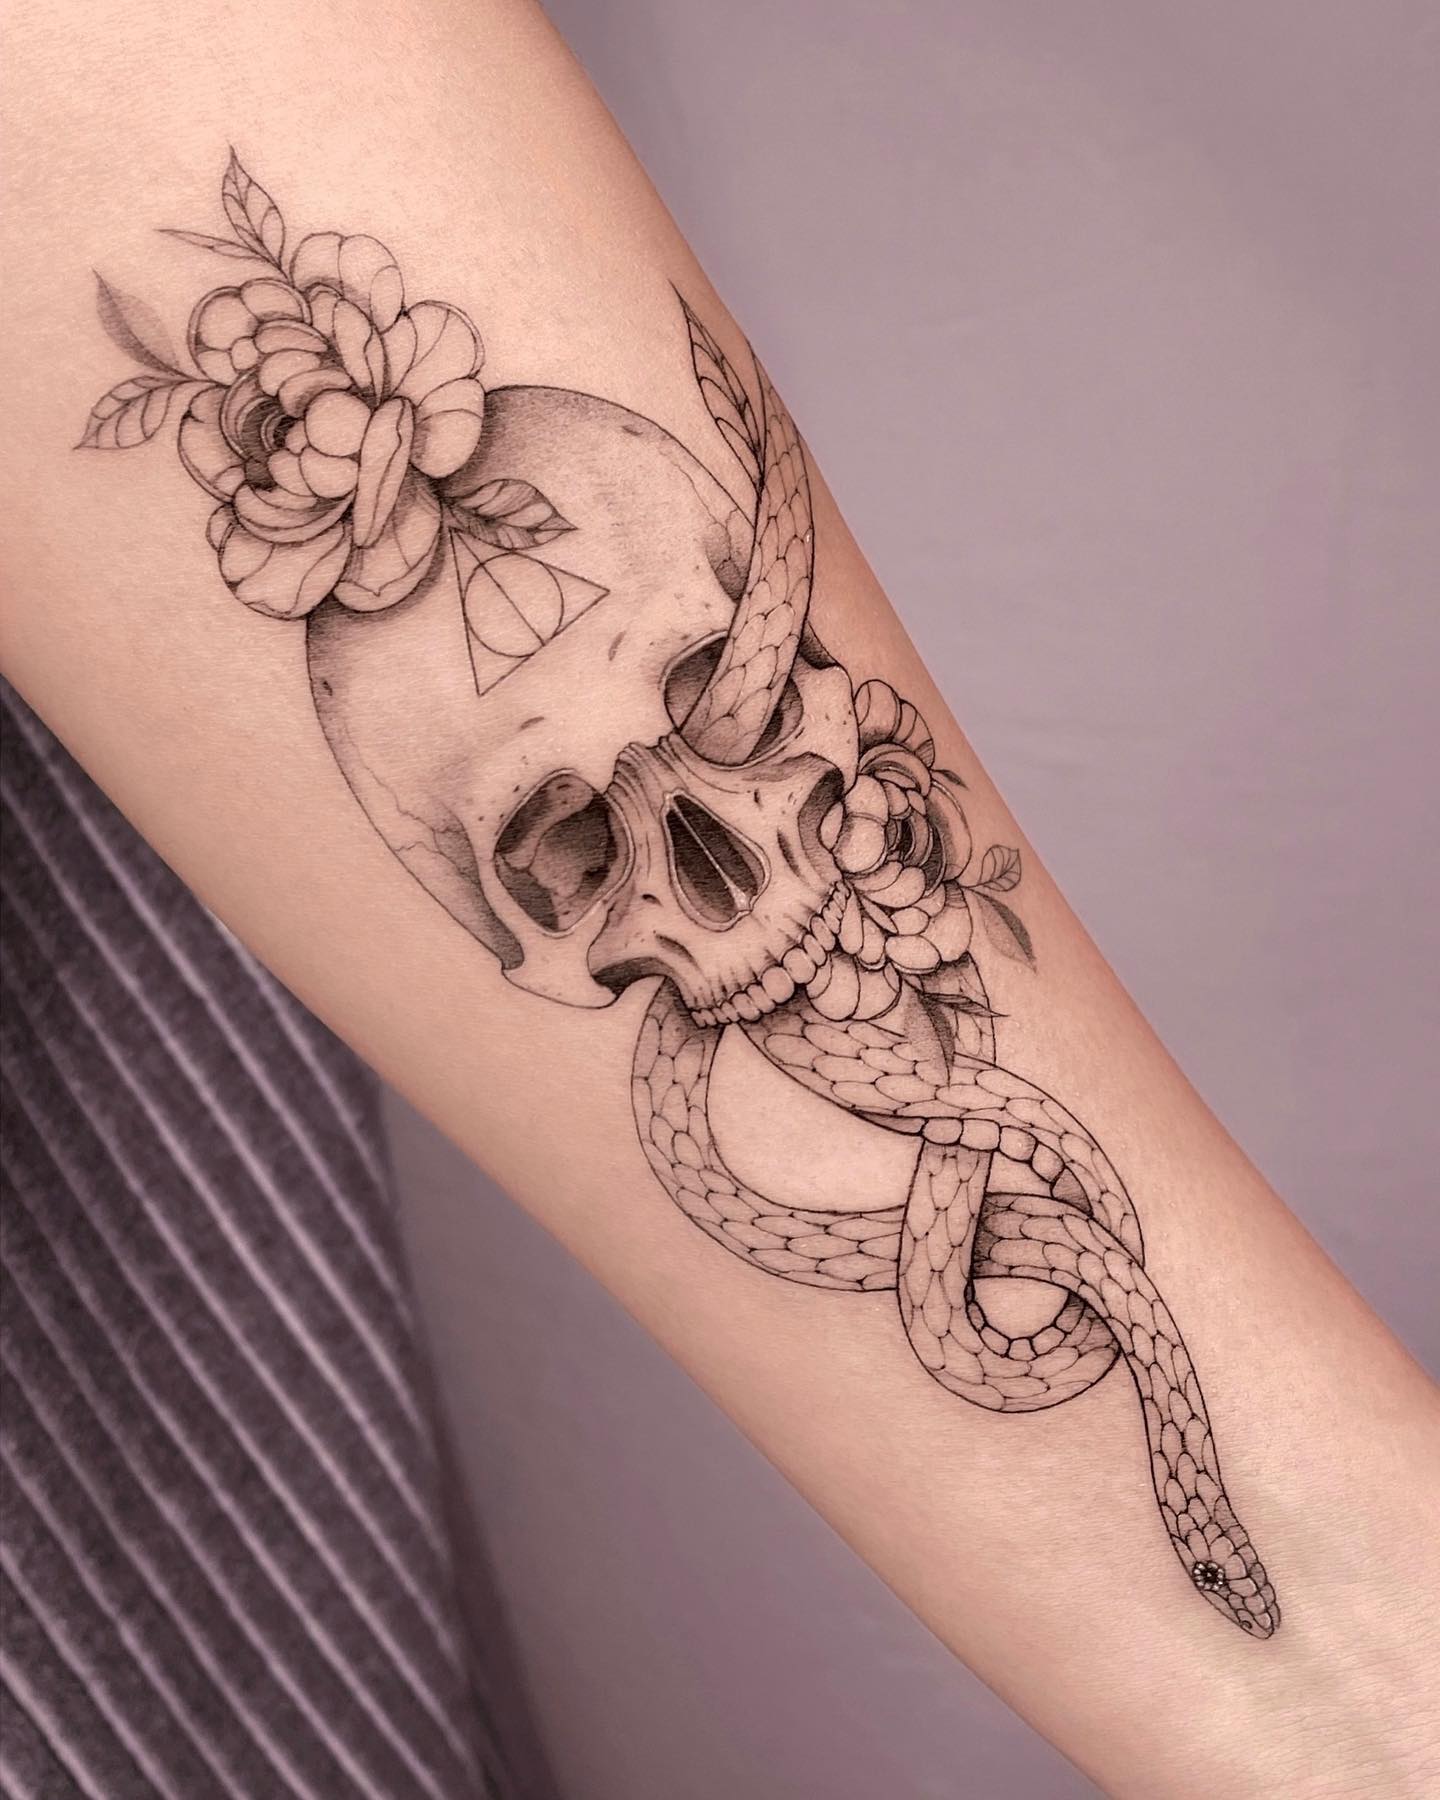 All the lines and details look so real here! Besides the great artwork, flower details give this death eater tattoo an extra beauty. Go for it if you want to stand out from the crowd.